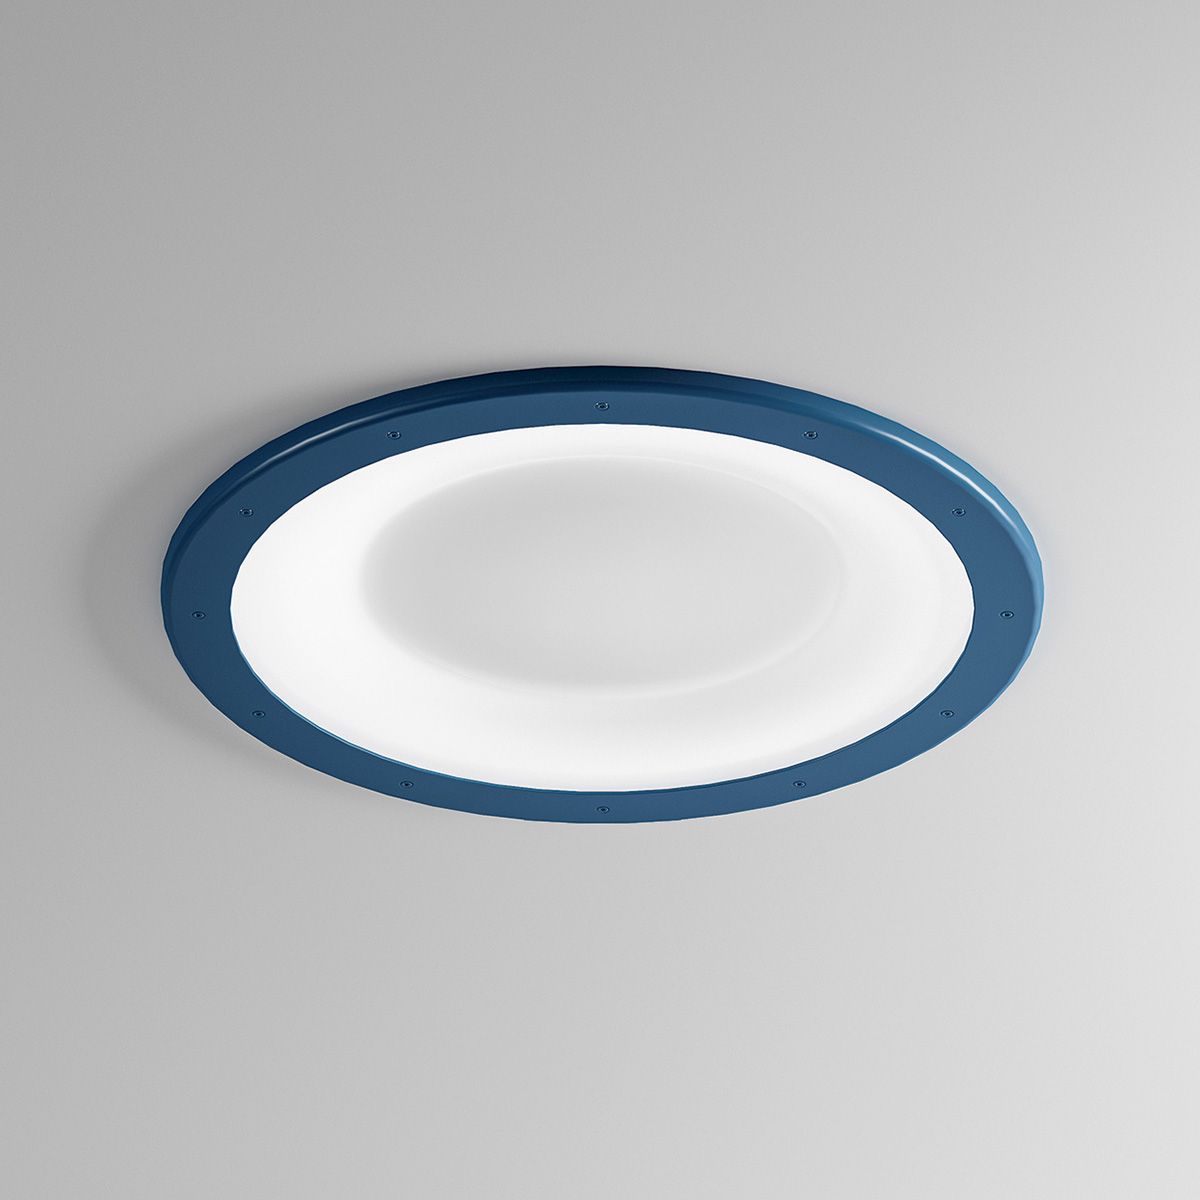 Ceiling mount behavioral health fixture with Cove Blue finish